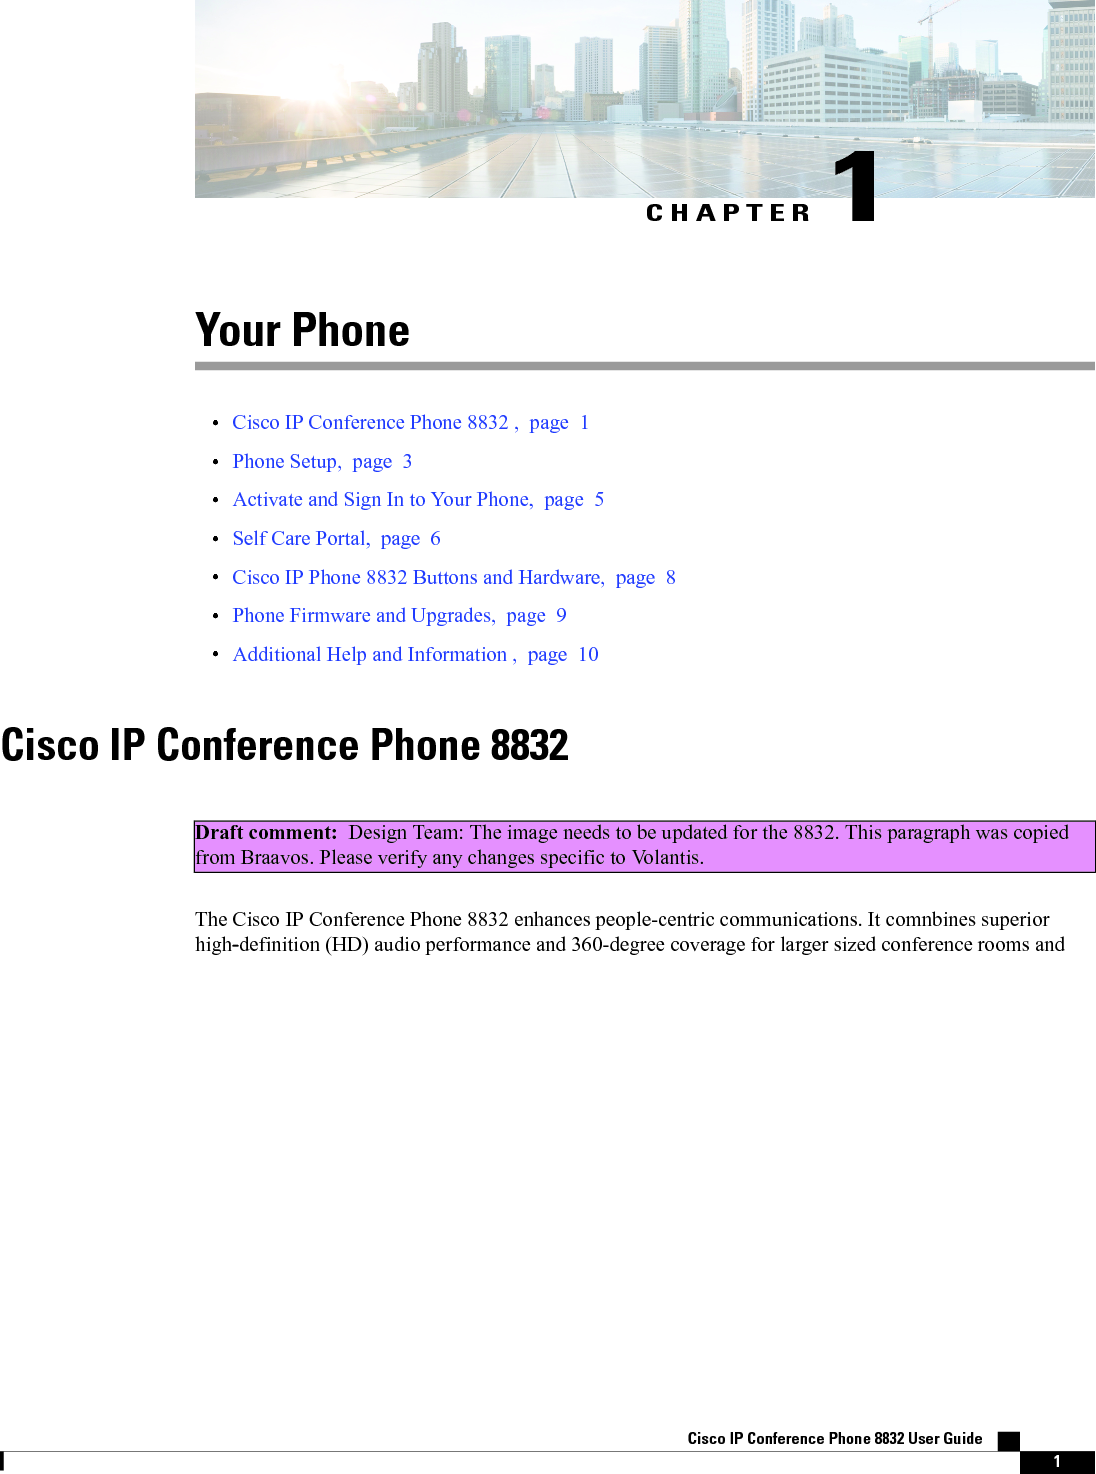 CHAPTER 1Your Phone•Cisco IP Conference Phone 8832 , page 1•Phone Setup, page 3•Activate and Sign In to Your Phone, page 5•Self Care Portal, page 6•Cisco IP Phone 8832 Buttons and Hardware, page 8•Phone Firmware and Upgrades, page 9•Additional Help and Information , page 10Cisco IP Conference Phone 8832Draft comment: Design Team: The image needs to be updated for the 8832. This paragraph was copiedfrom Braavos. Please verify any changes specific to Volantis.The Cisco IP Conference Phone 8832 enhances people-centric communications. It comnbines superiorhigh-definition (HD) audio performance and 360-degree coverage for larger sized conference rooms andCisco IP Conference Phone 8832 User Guide    1